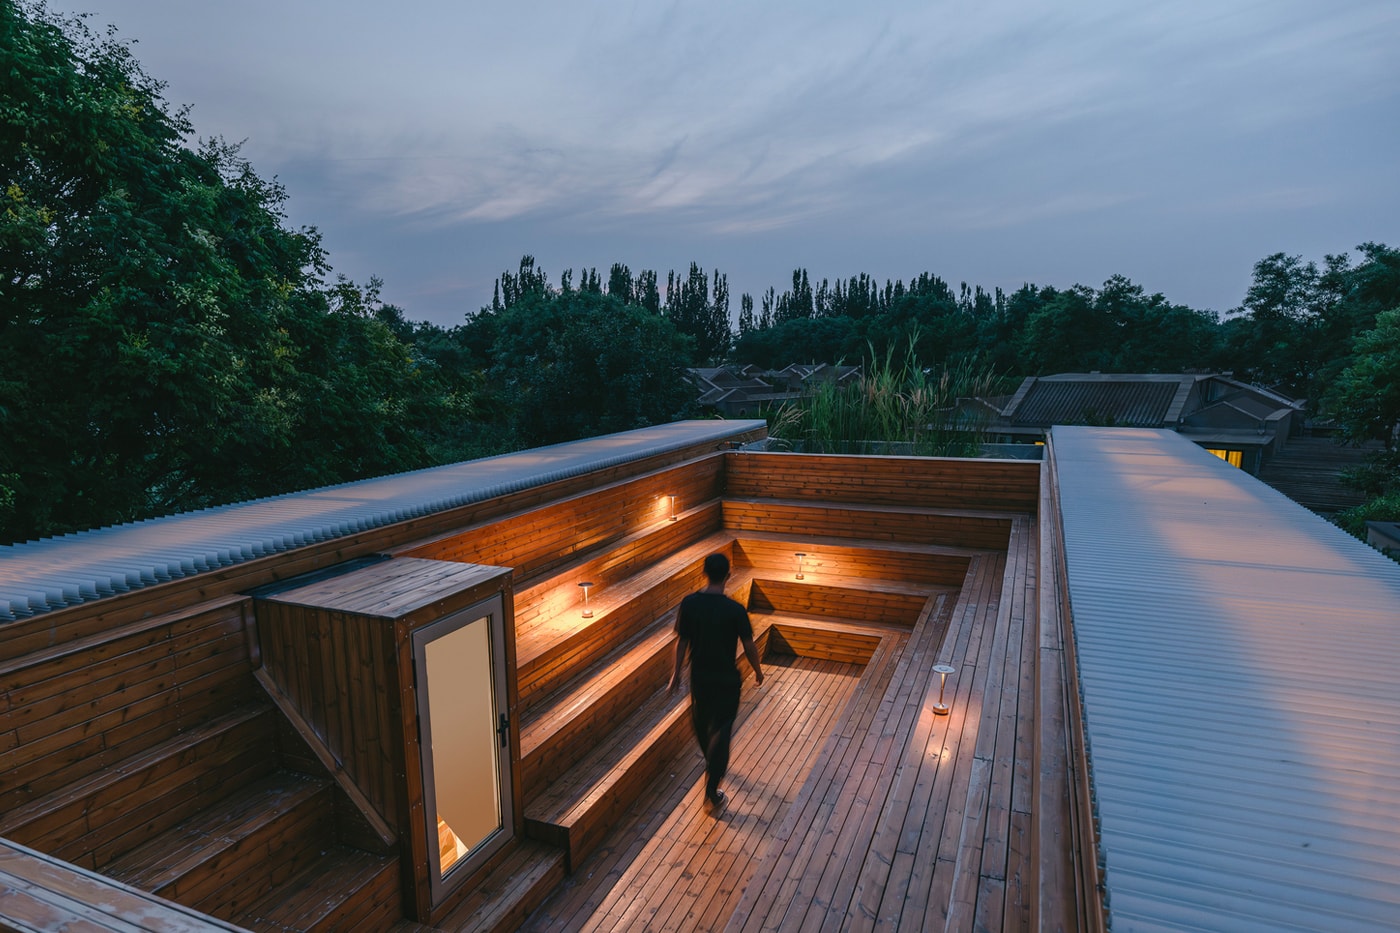 Chaoffice "House Under The Boat" Beijing Chaoyang Architecture Design